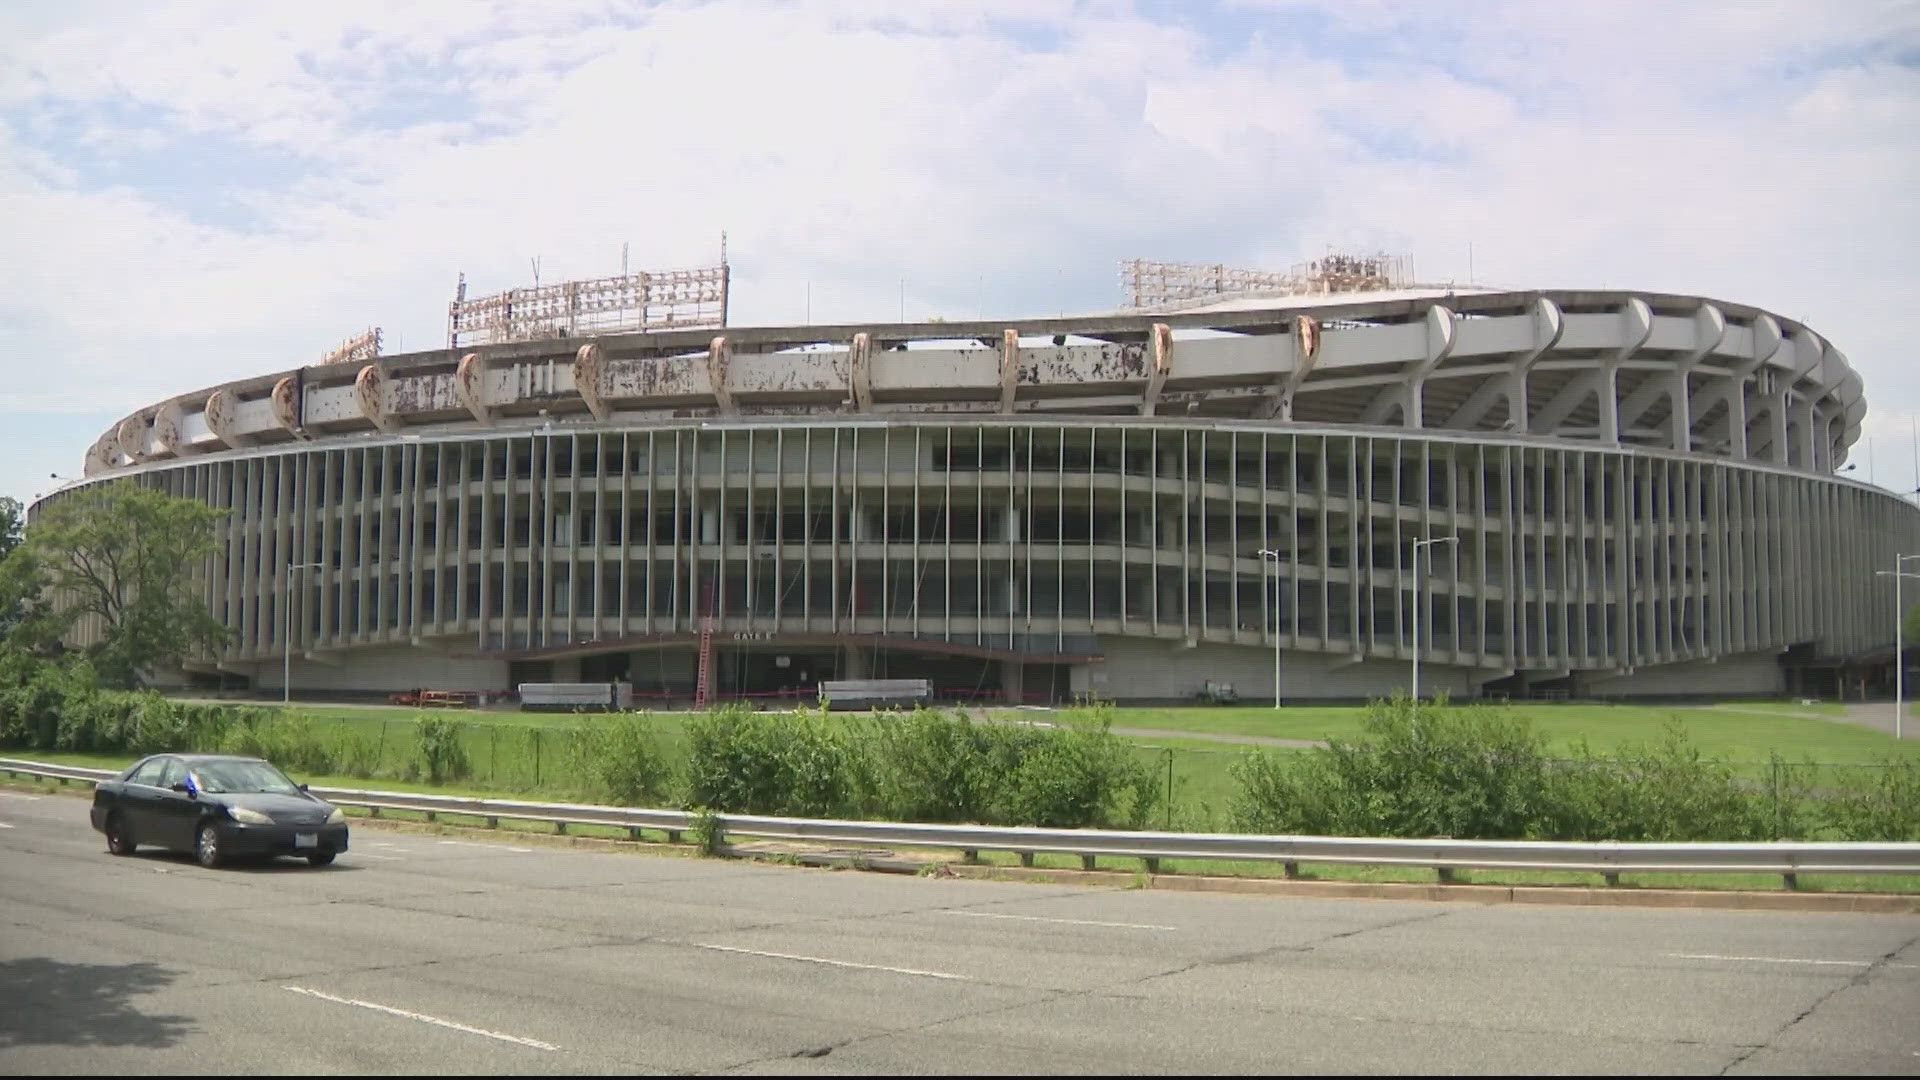 The RFK Memorial Stadium Campus Revitalization Act would lease the RFK site to the District for 99 years allowing the city to develop the land into a mixed-use site.